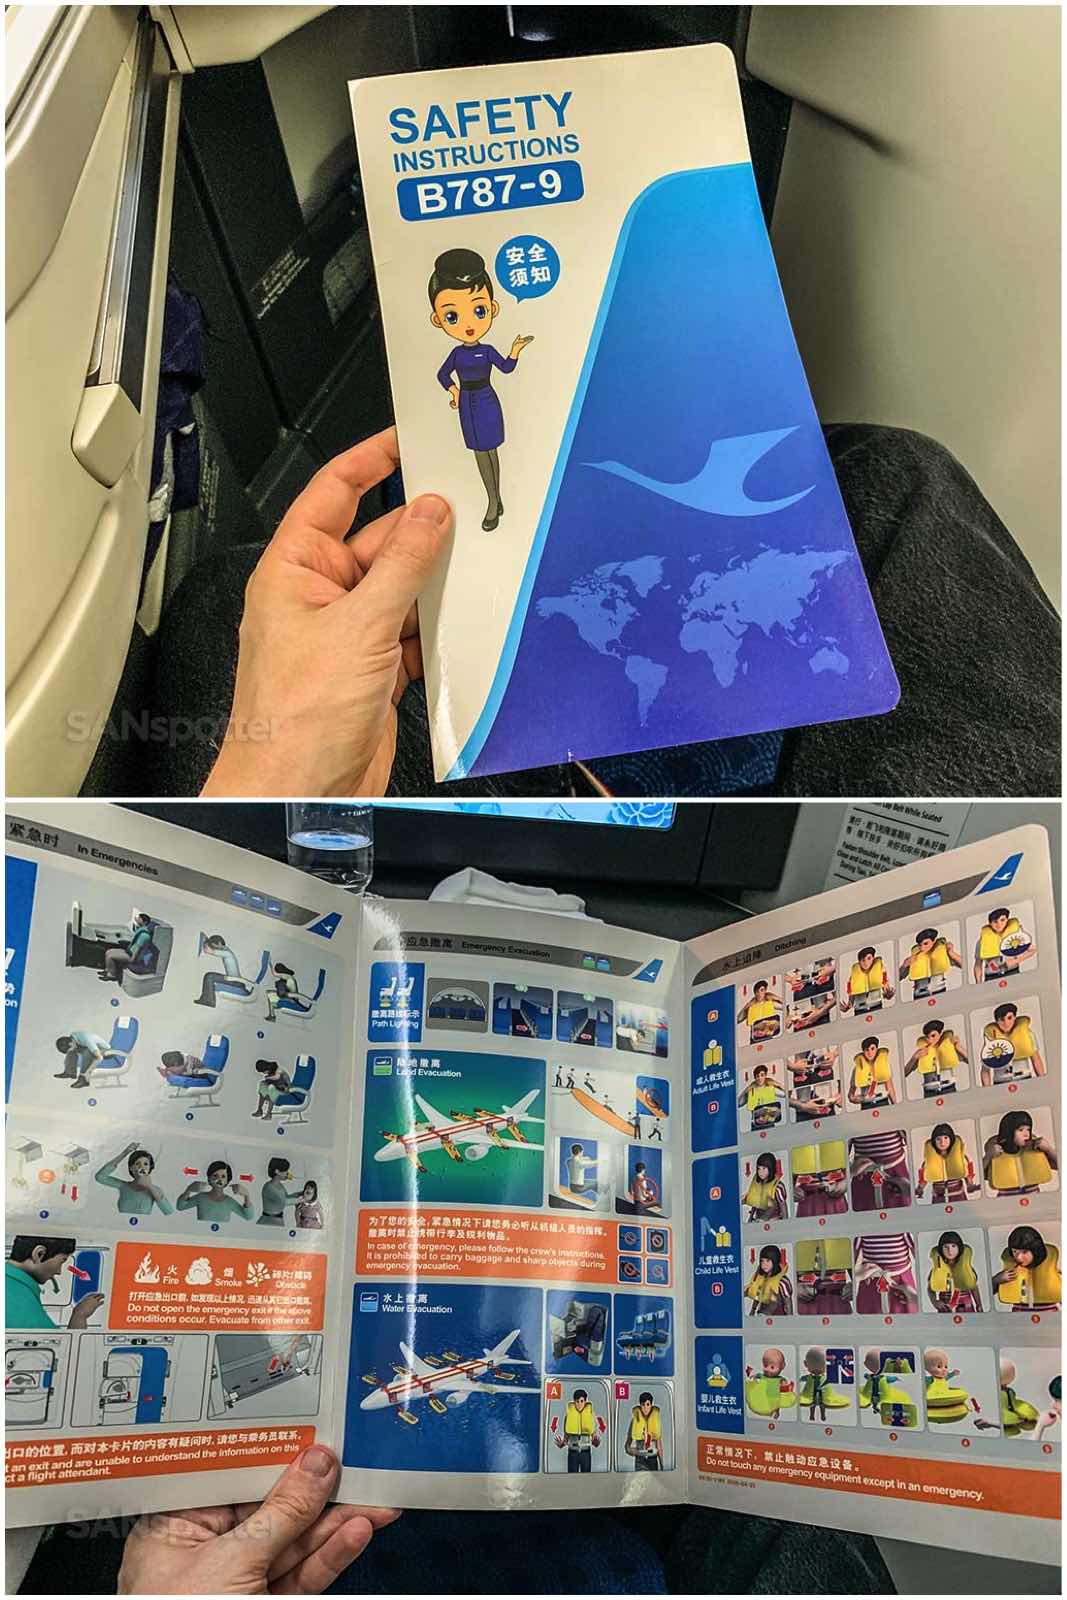 Xiamen Airlines 787-9 safety card